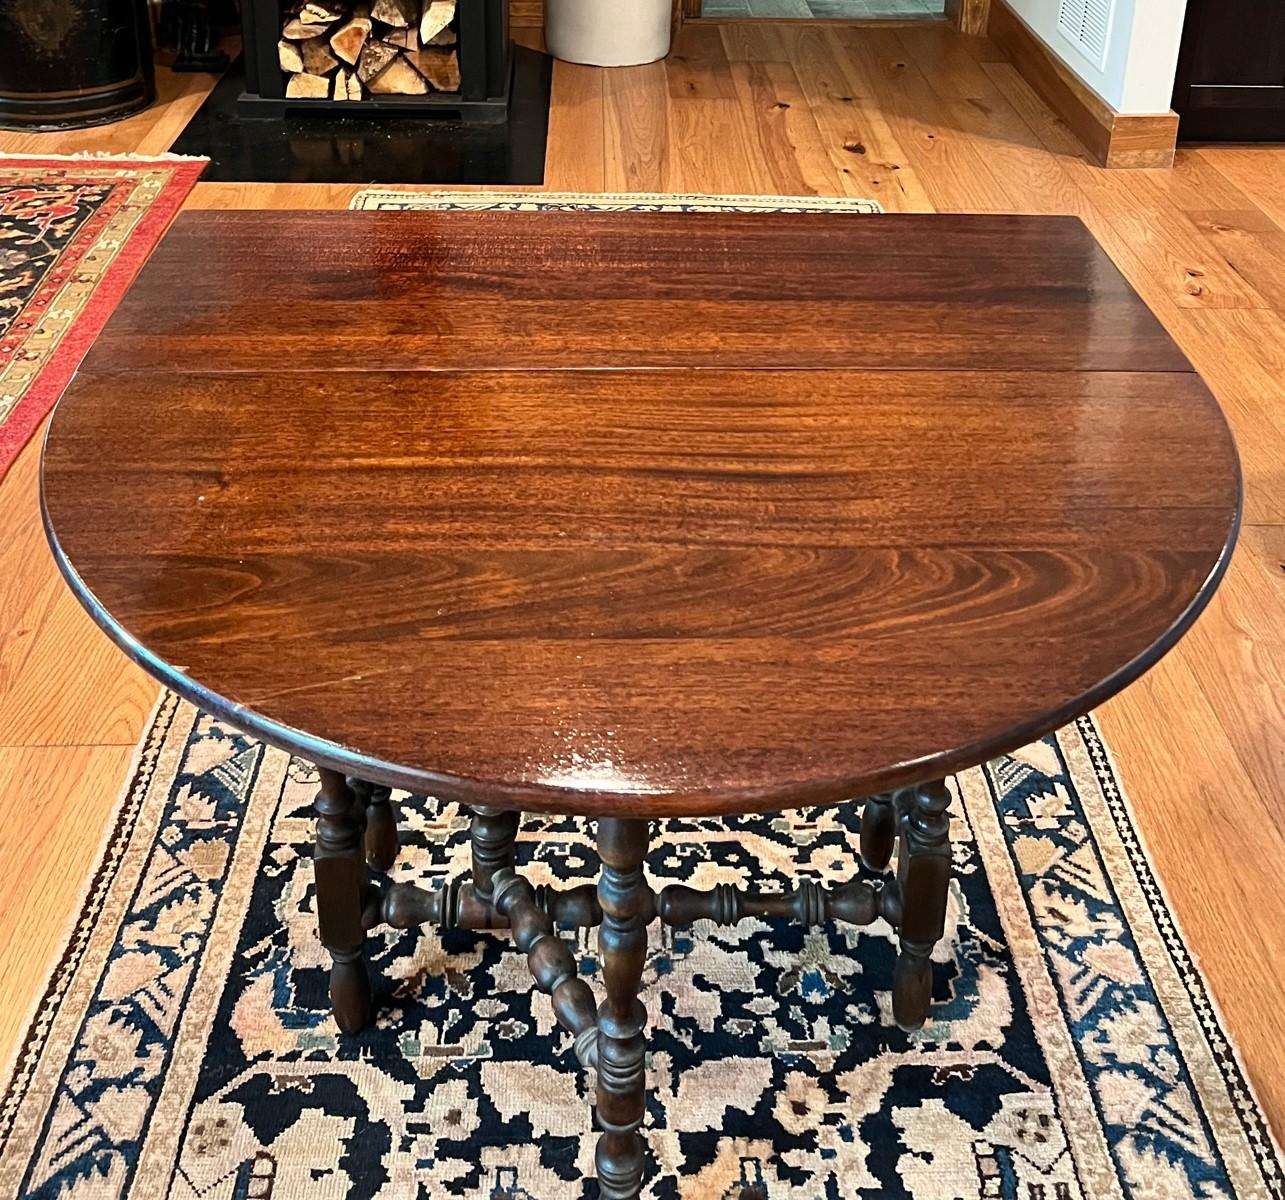 Mid-19th Century Antique Mahogany Oval Victorian Sunderland/Folding Table with Turned Legs For Sale